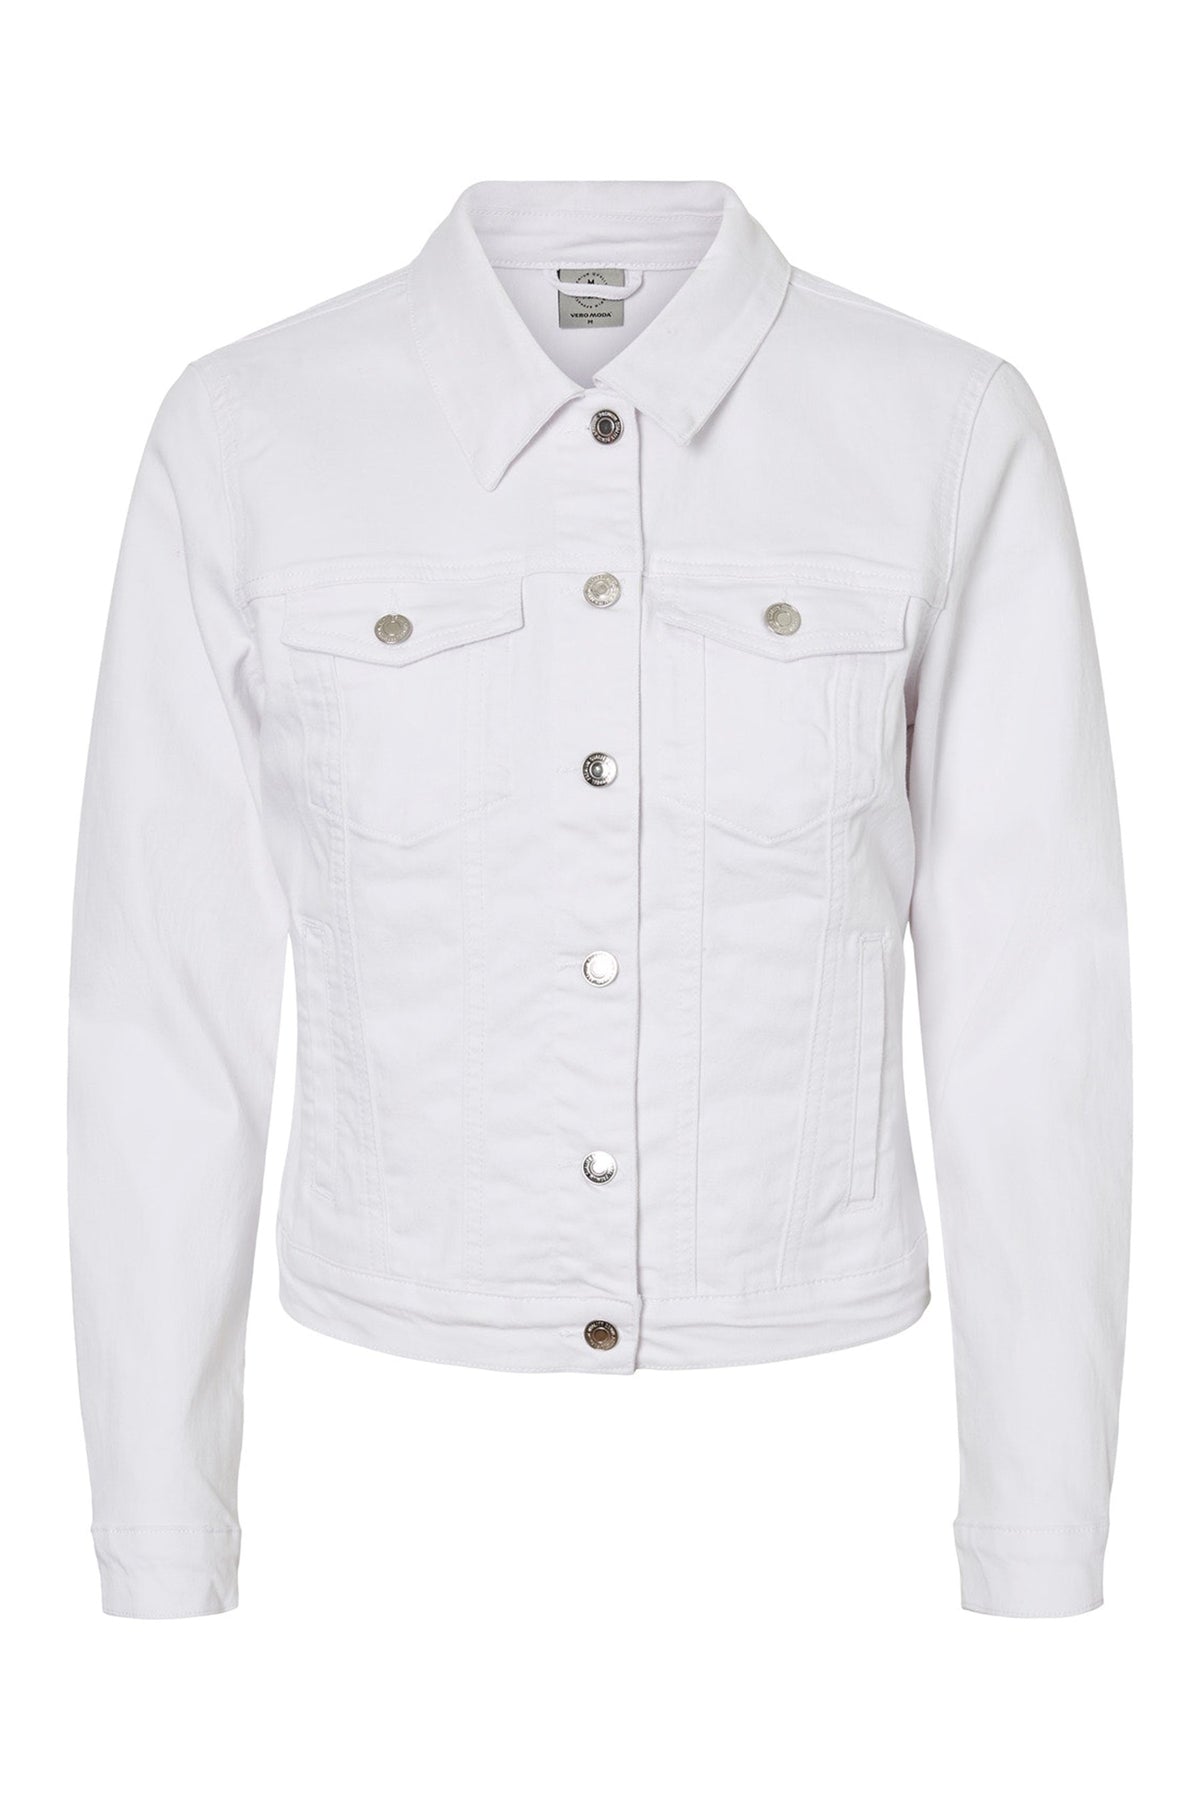 Fitted white denim jacket with button-down closure, chest pockets, and long sleeves from Ace Cart.